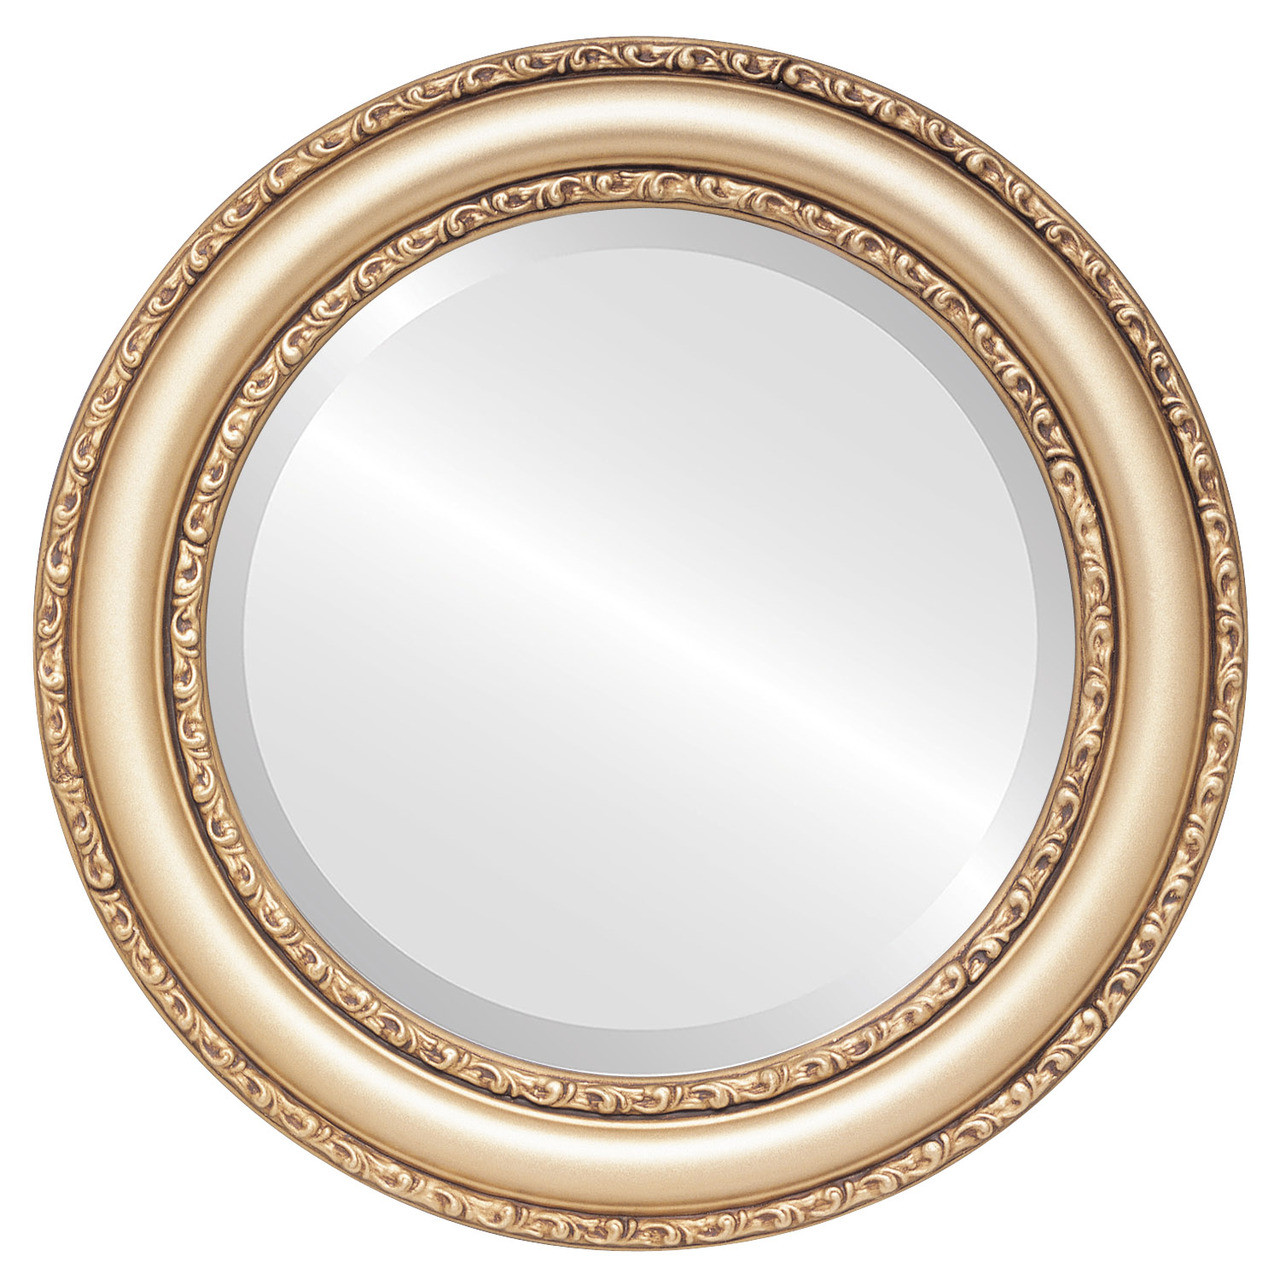 Antique Gold Round Mirrors from $136 | Free Shipping